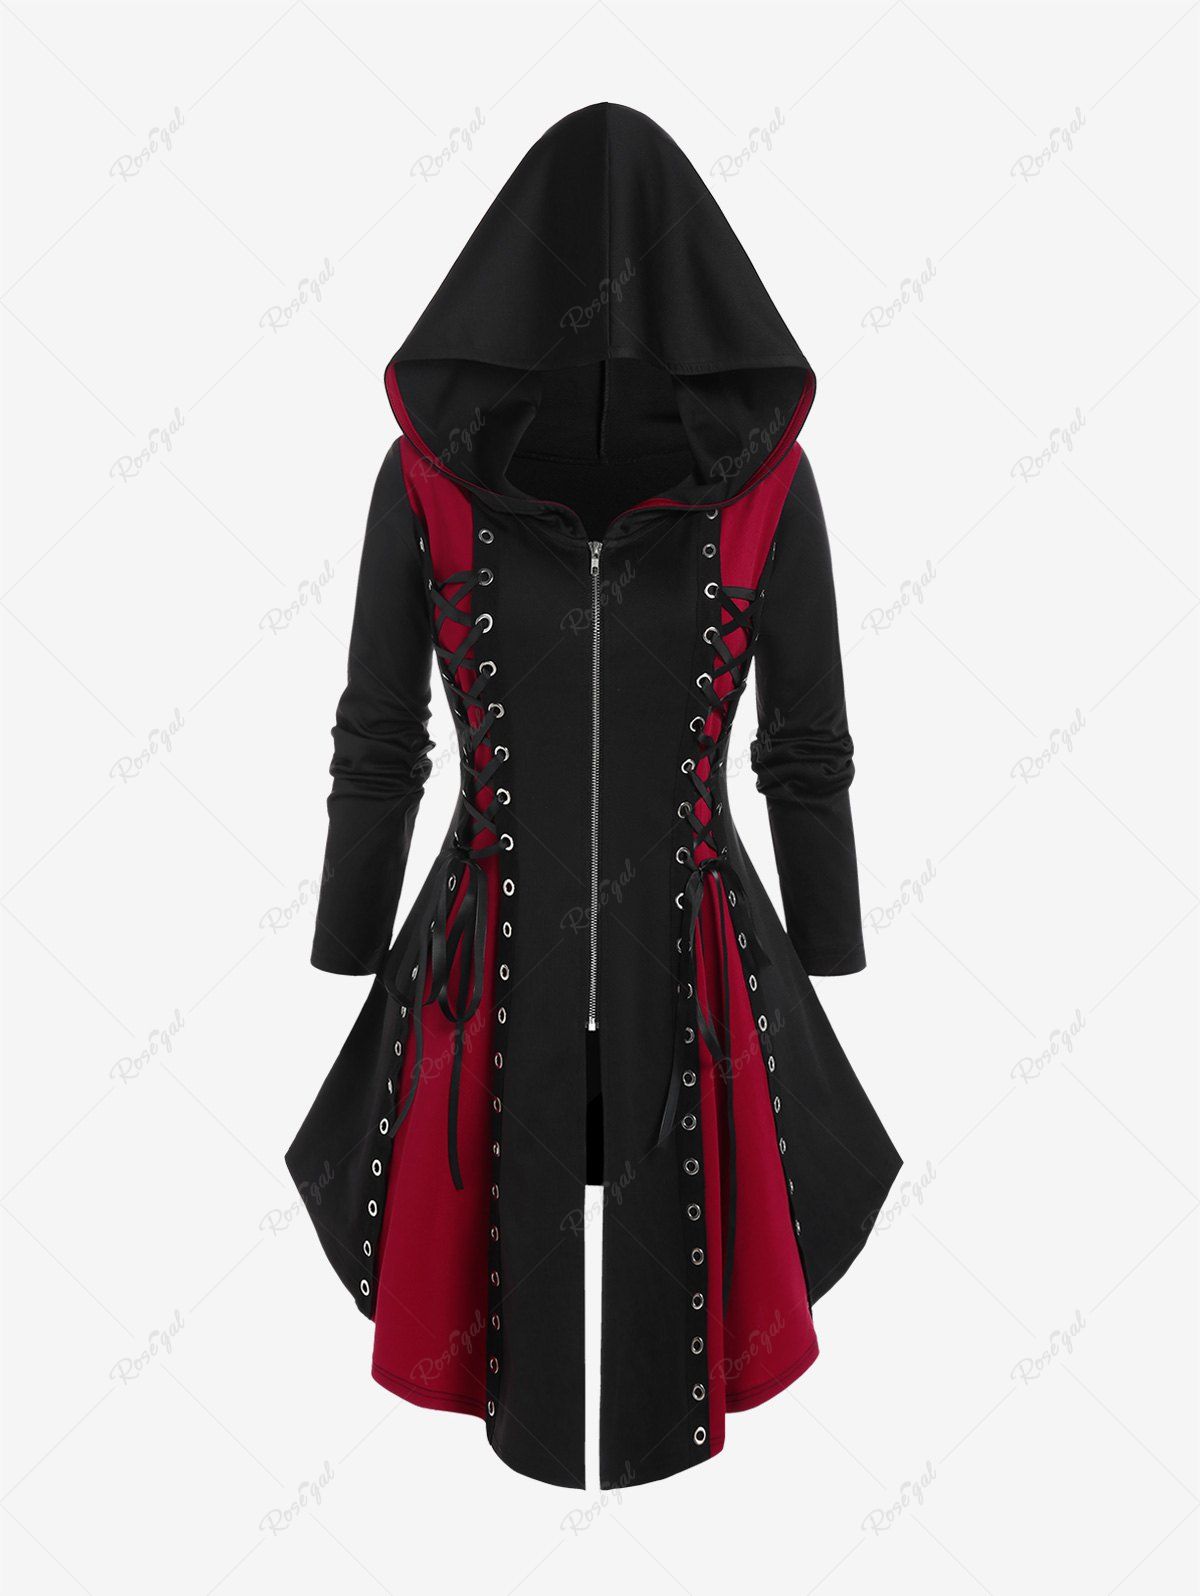 Store Hooded Lace Up Grommets Colorblock Gothic Coat  